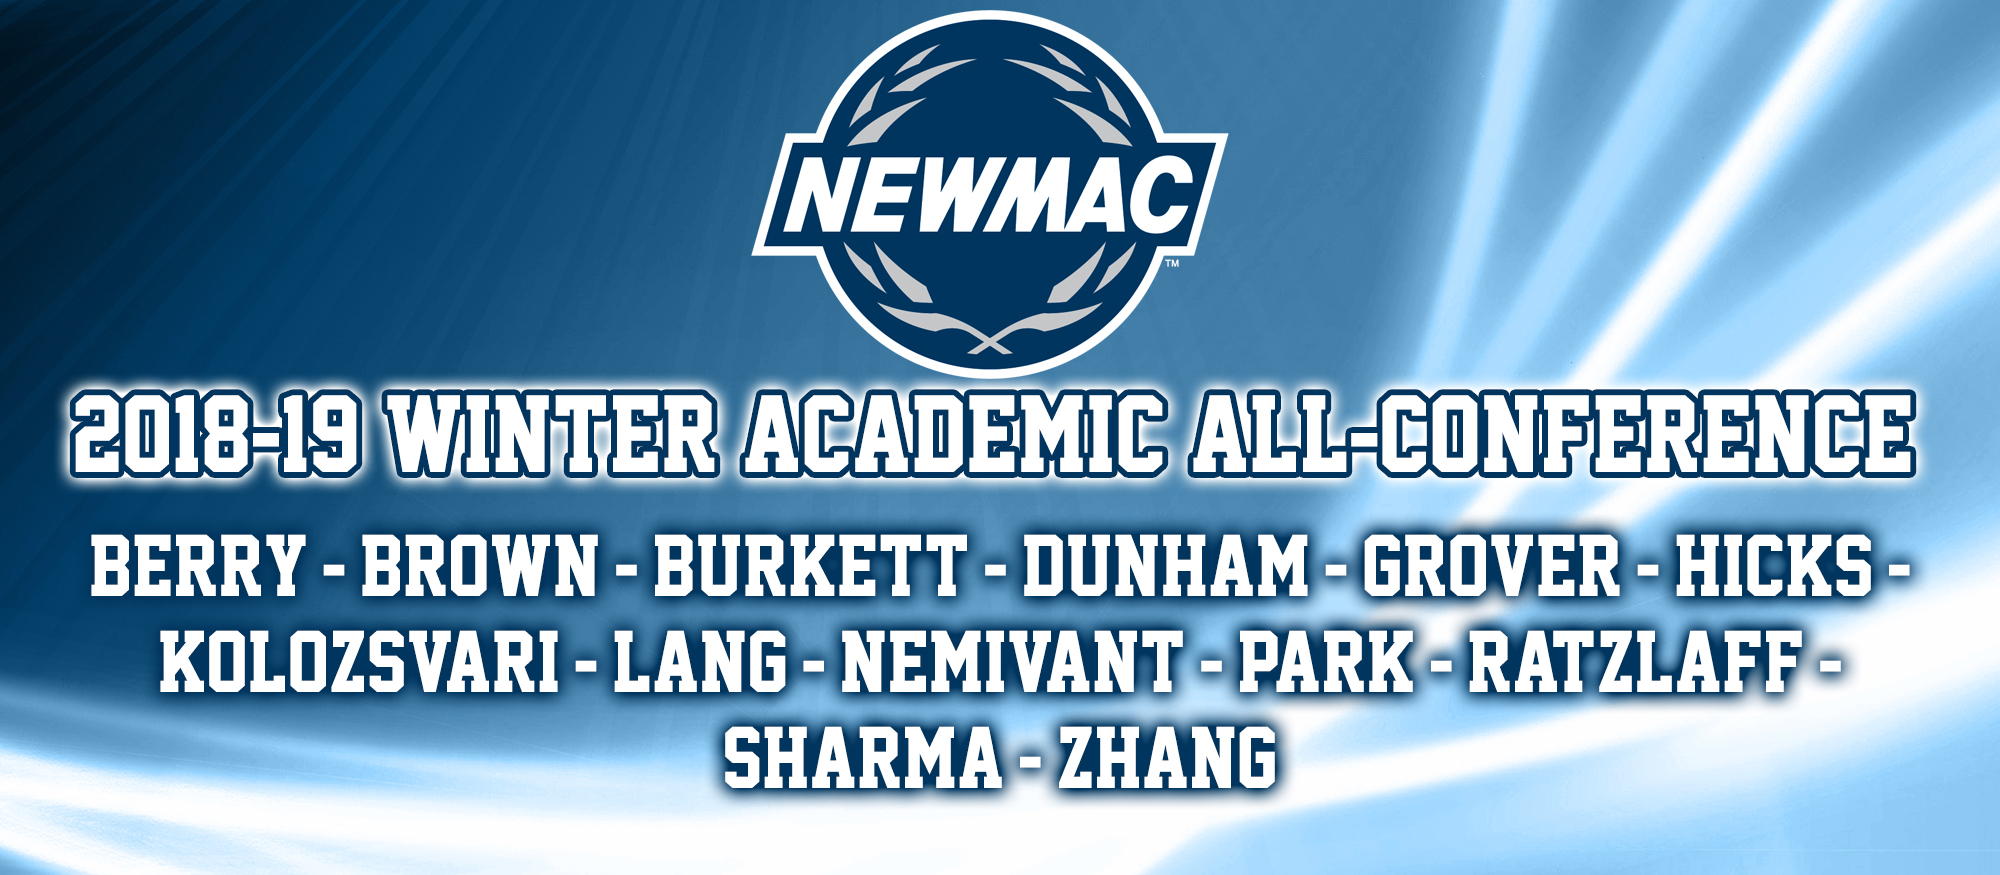 Photo showing the 13 student-athletes selected to the 2018-19 NEWMAC Academic All-Conference Teams for swimming & diving and basketball.